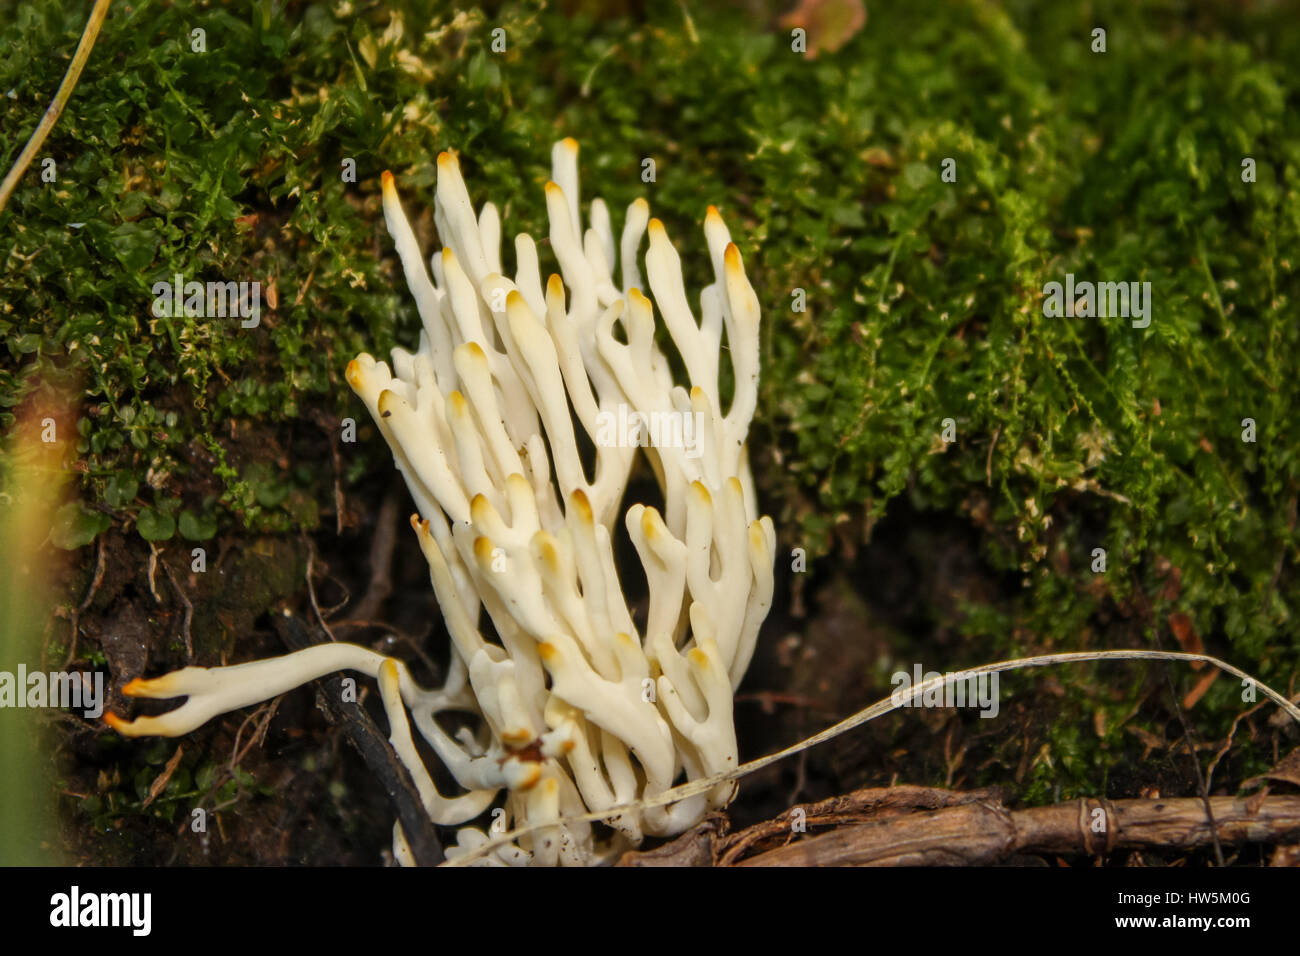 long white mushrooms with yellow on the tips Stock Photo